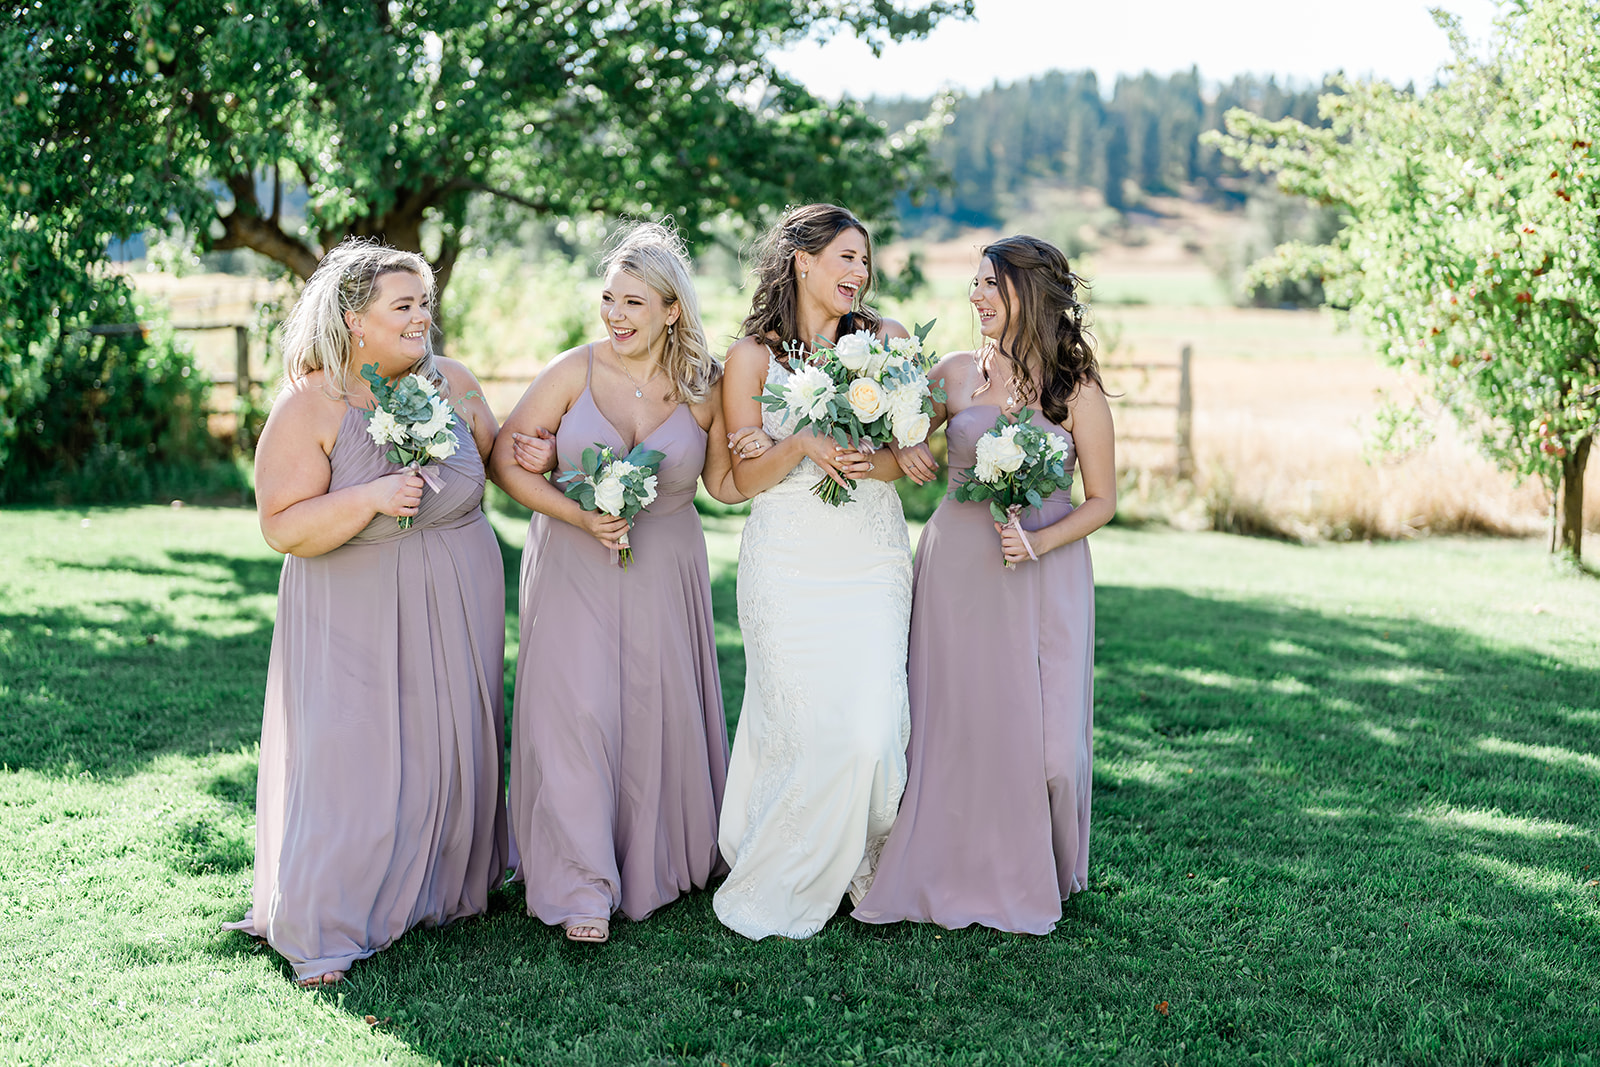 Bridesmaid and Bride at a Cattle Barn Wedding